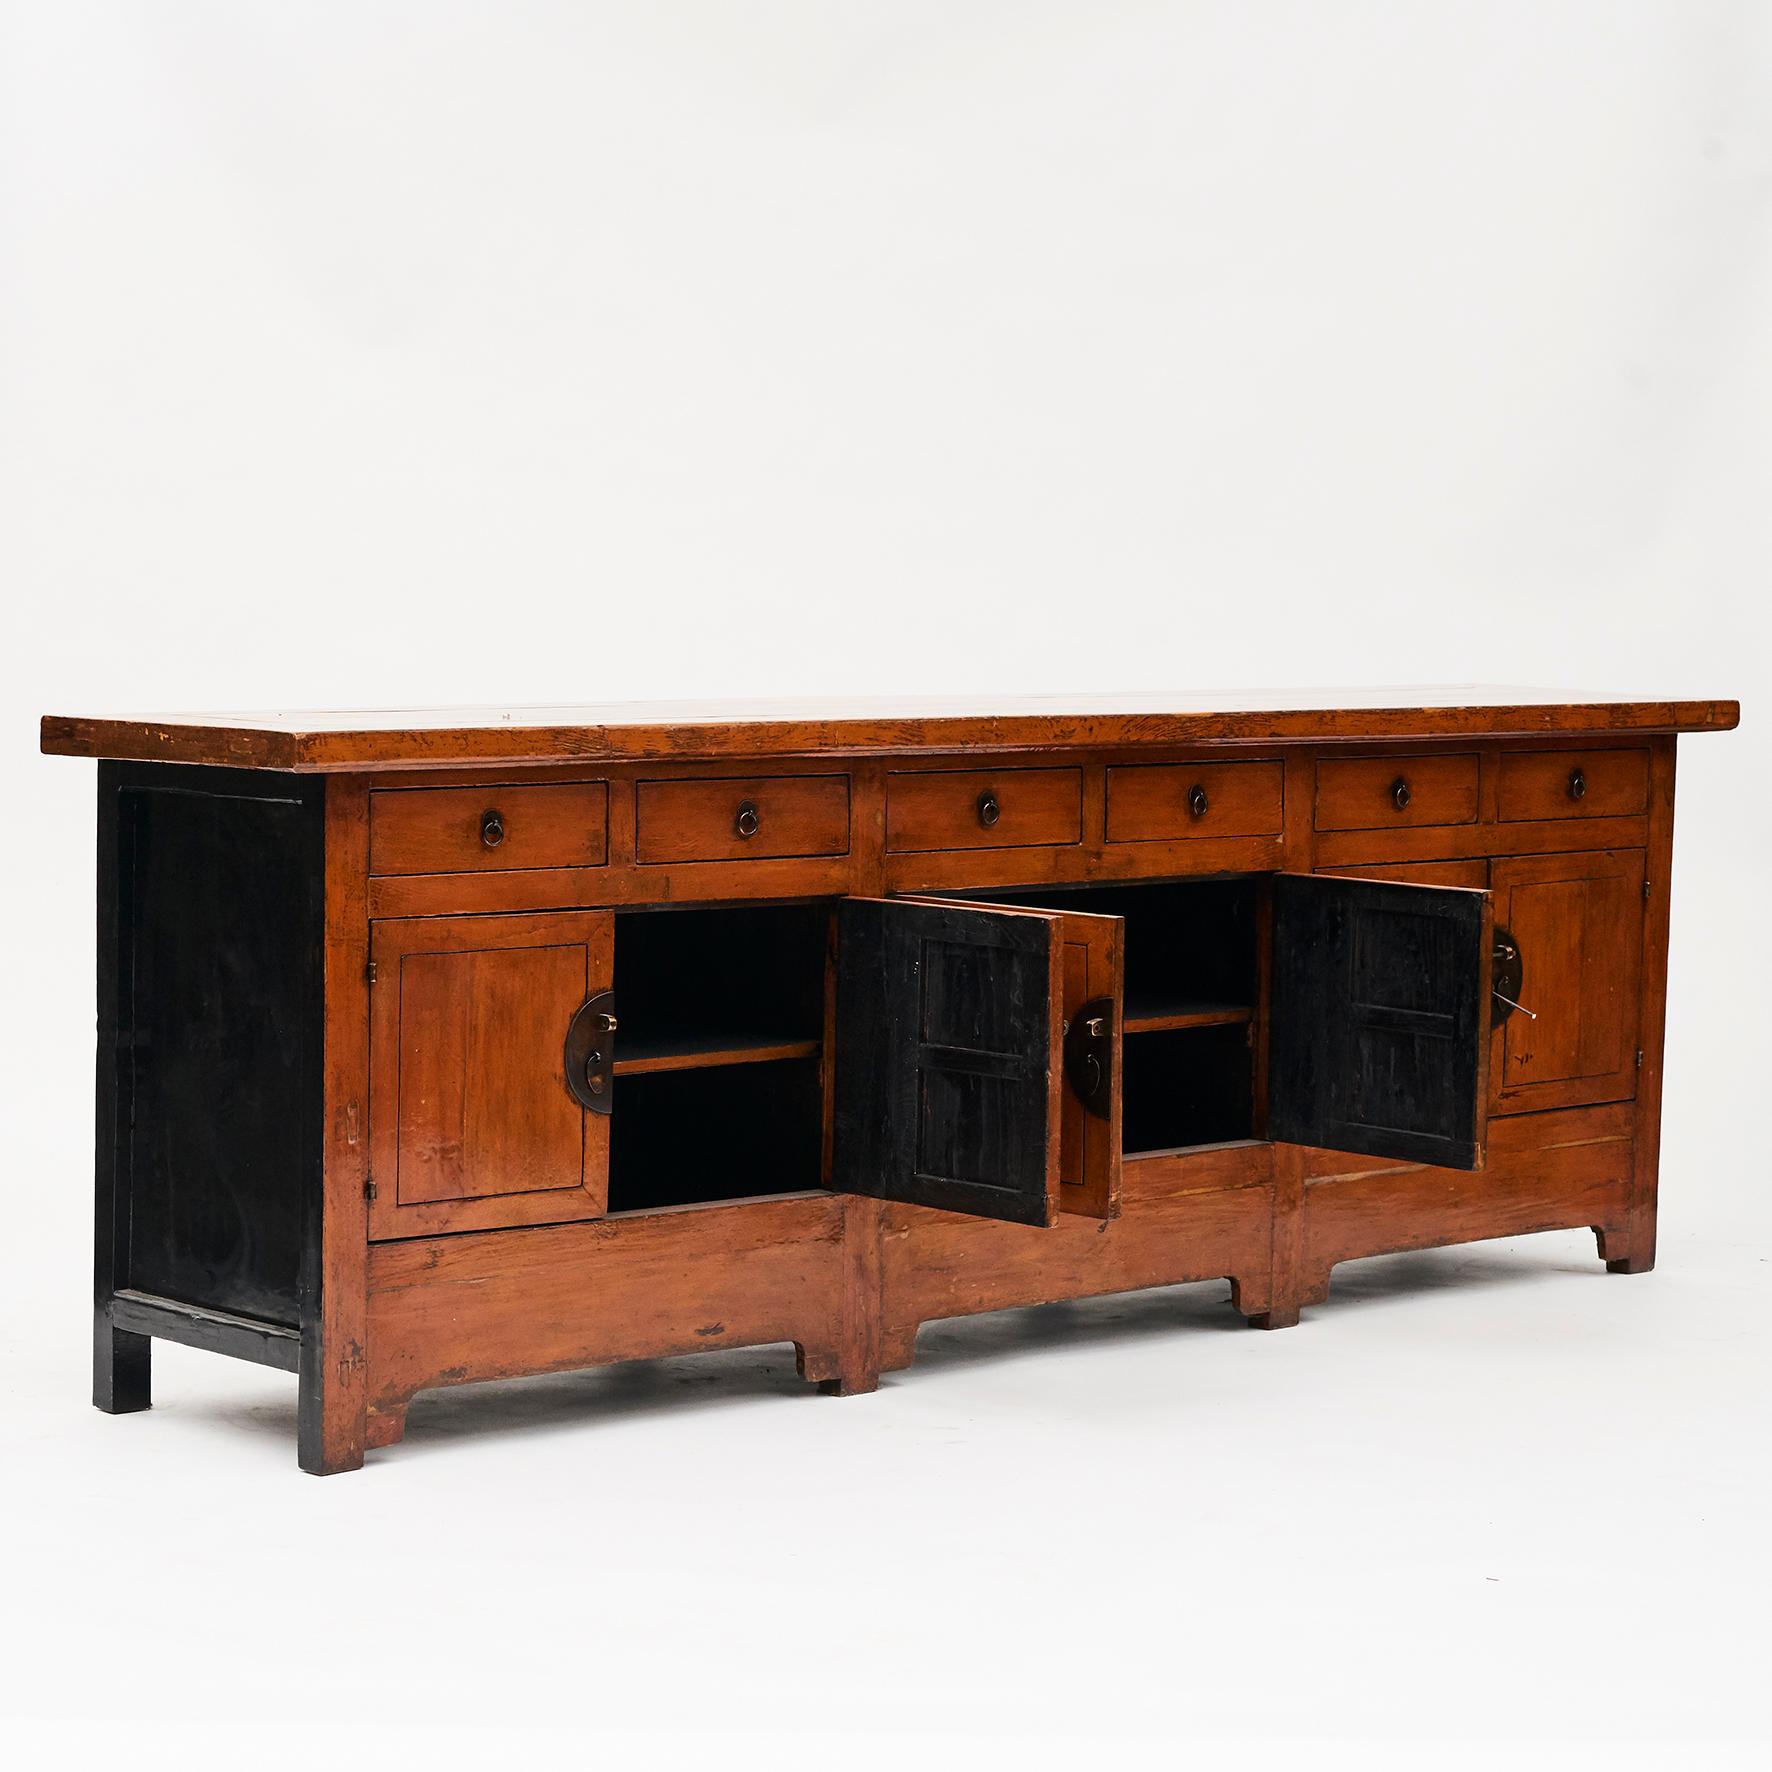 Qing 19th Century Chinese Sideboard In Cayenne Color Lacquer For Sale